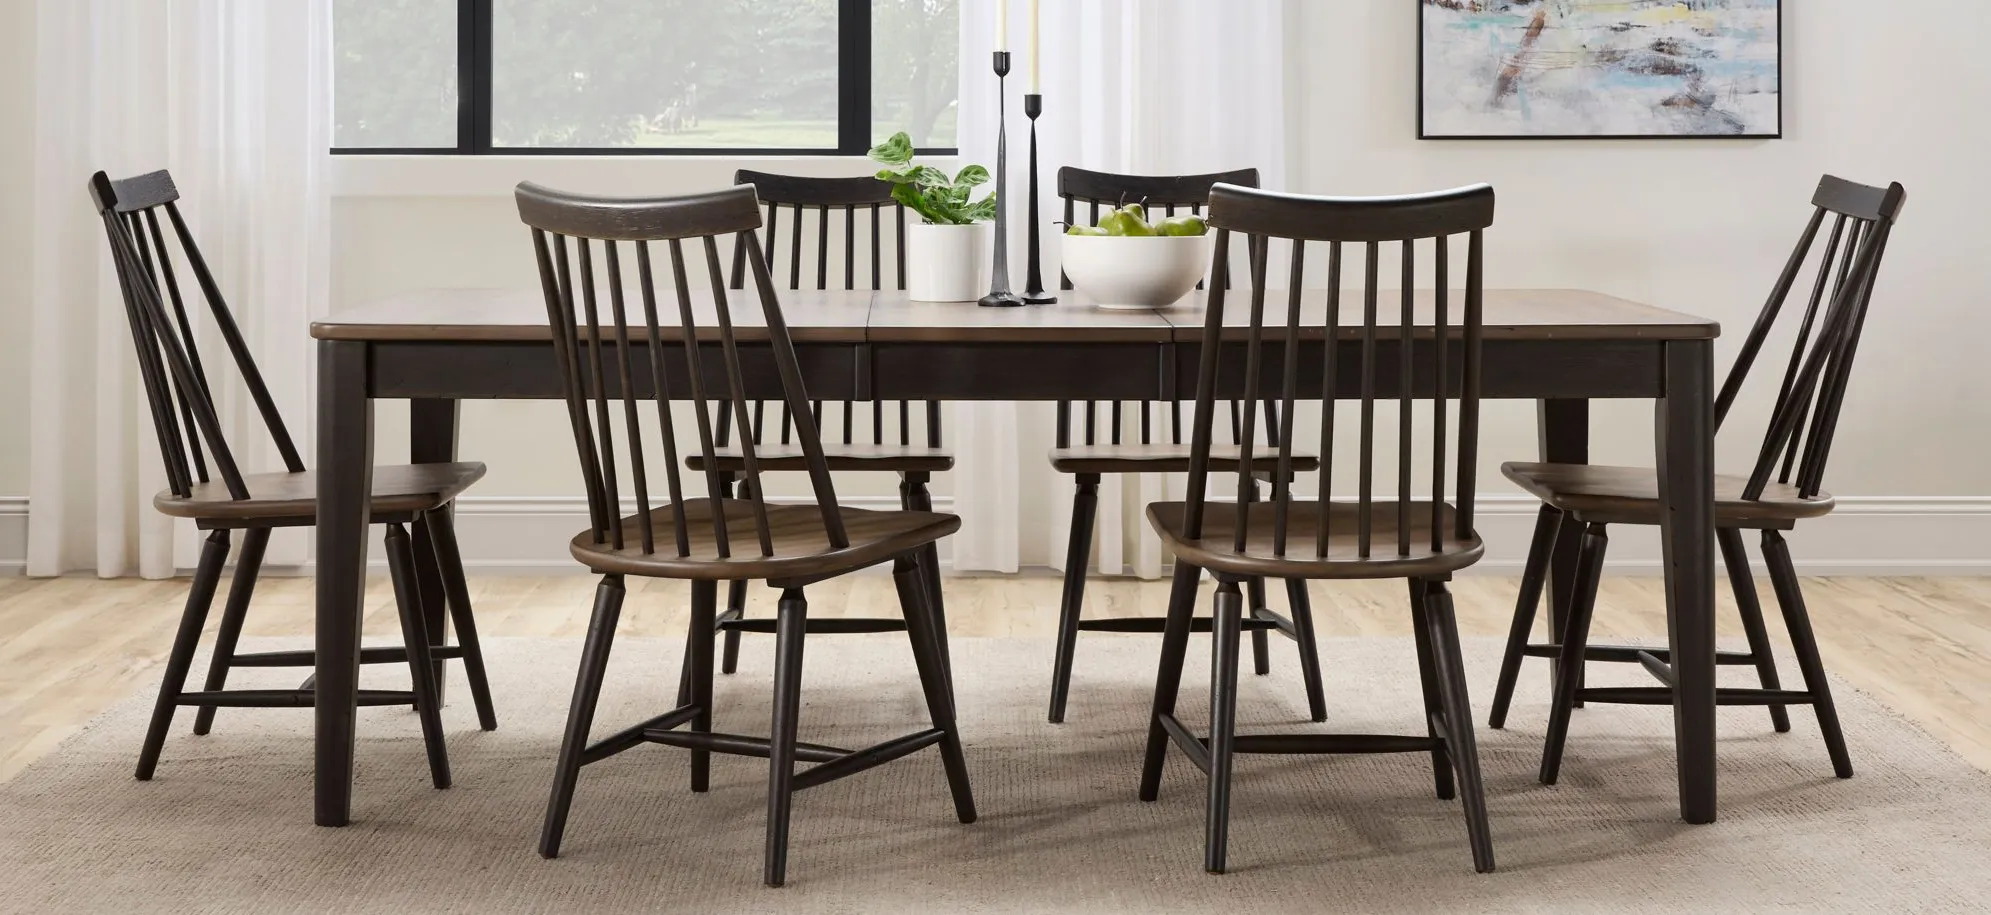 Highgrove 7-pc. Dining Set in Black and Woodtone by Liberty Furniture